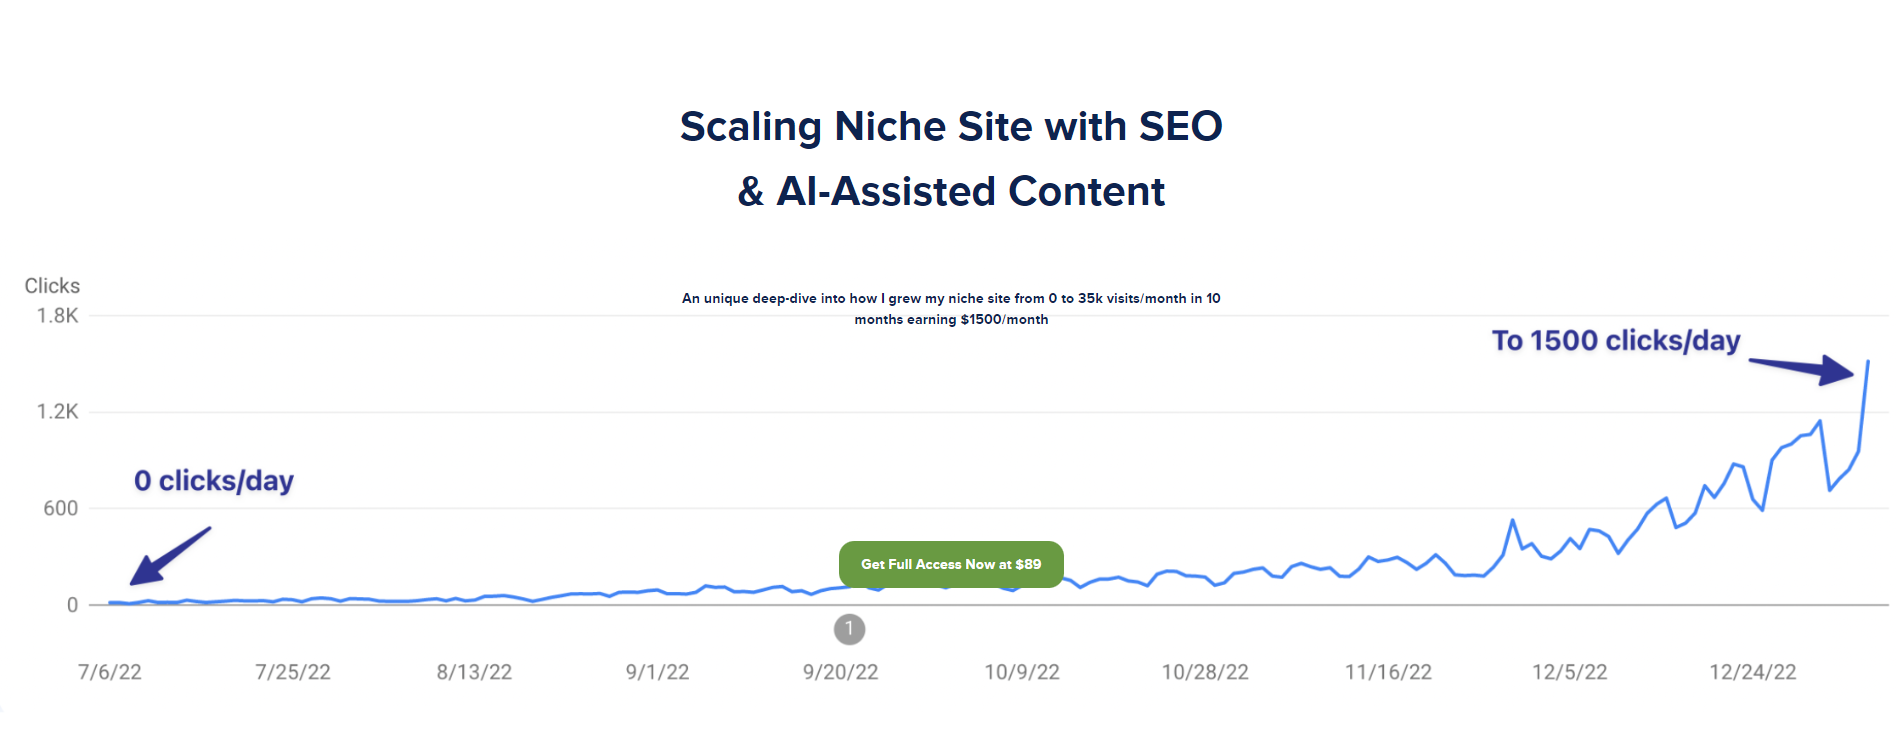 Tejas Rane - Scaling Niche Site with SEO & AI-Assisted Content